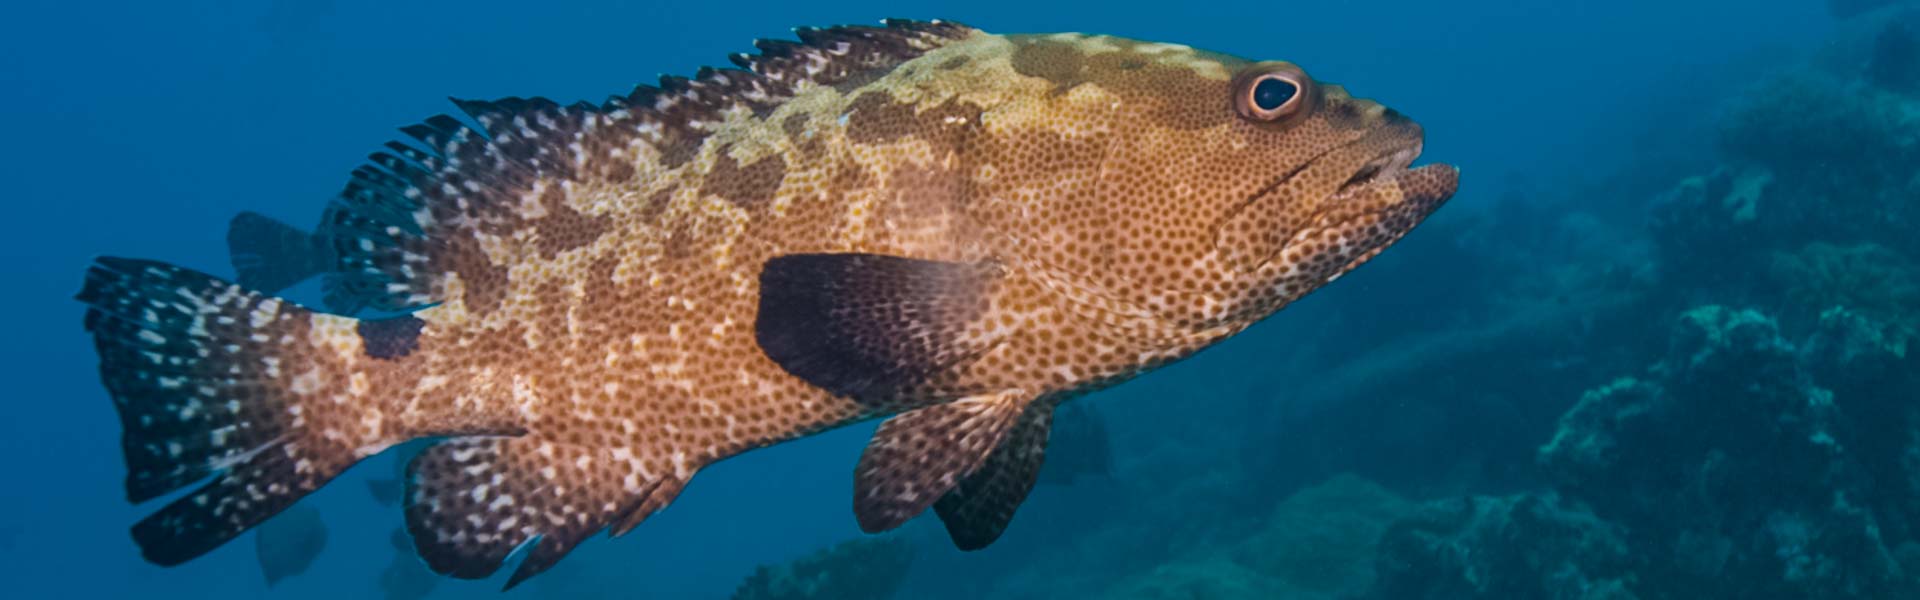 The Camouflage Grouper